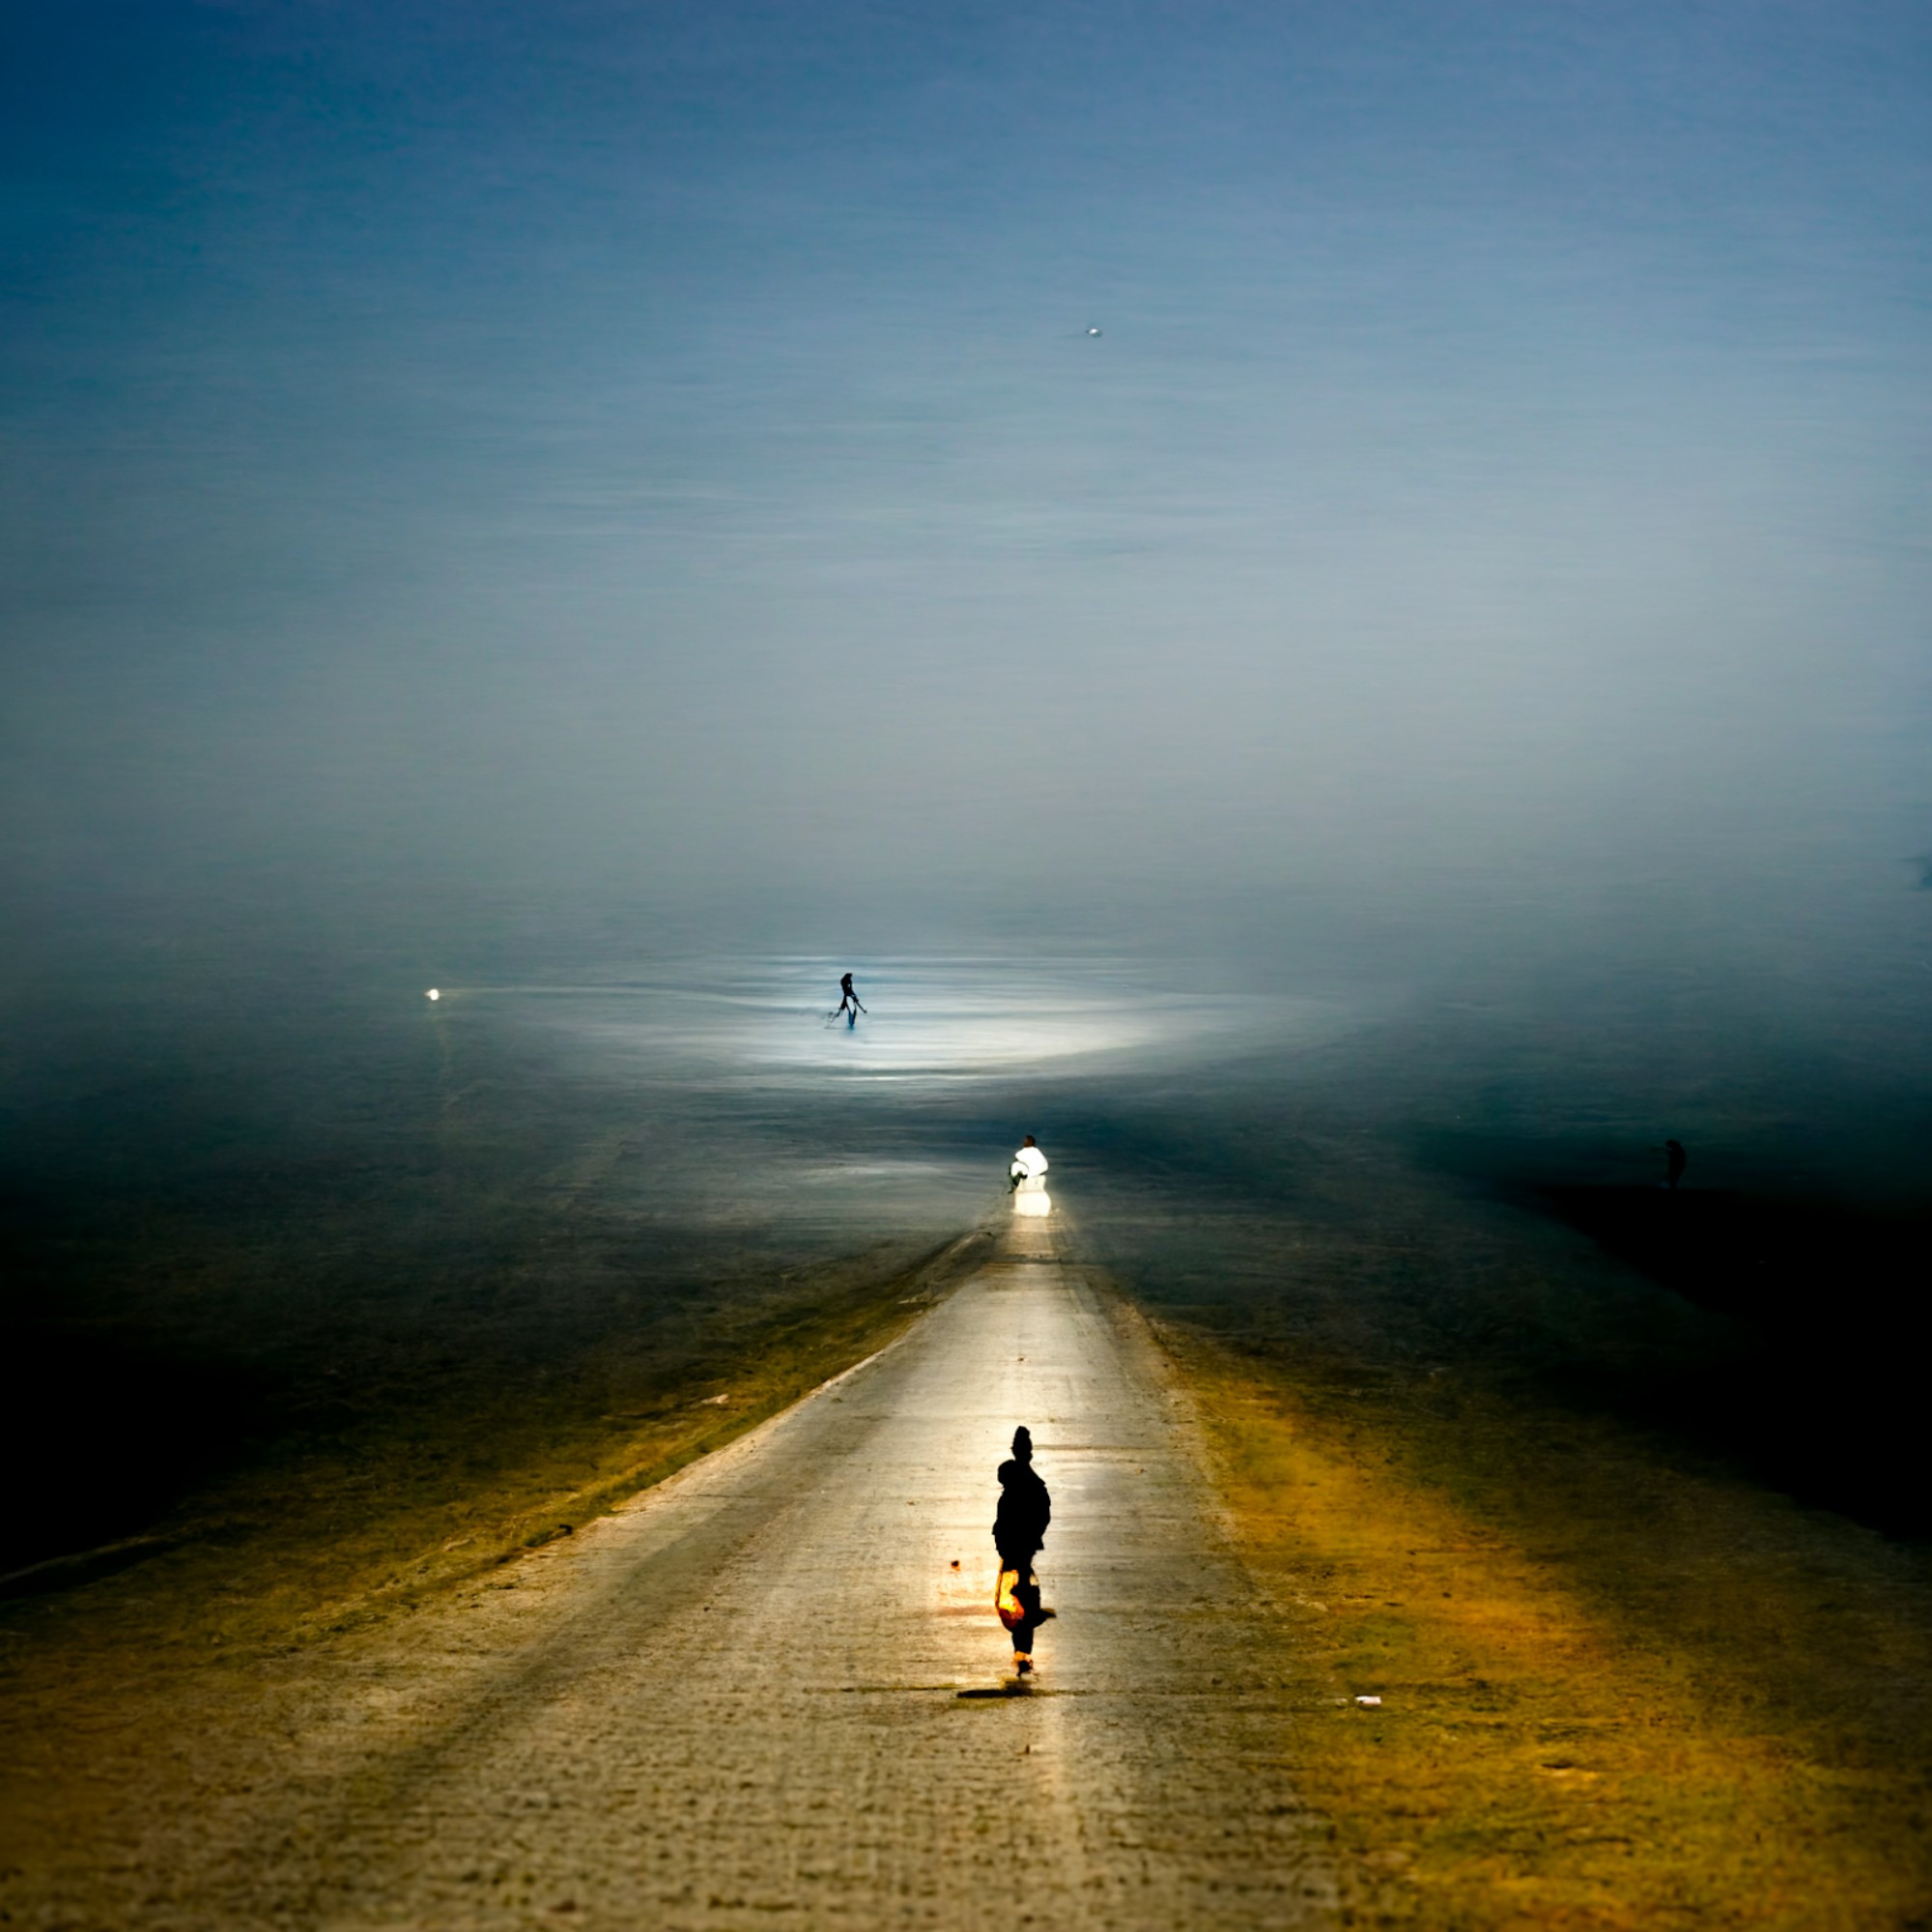 A lone person on an eerie empty road at dusk